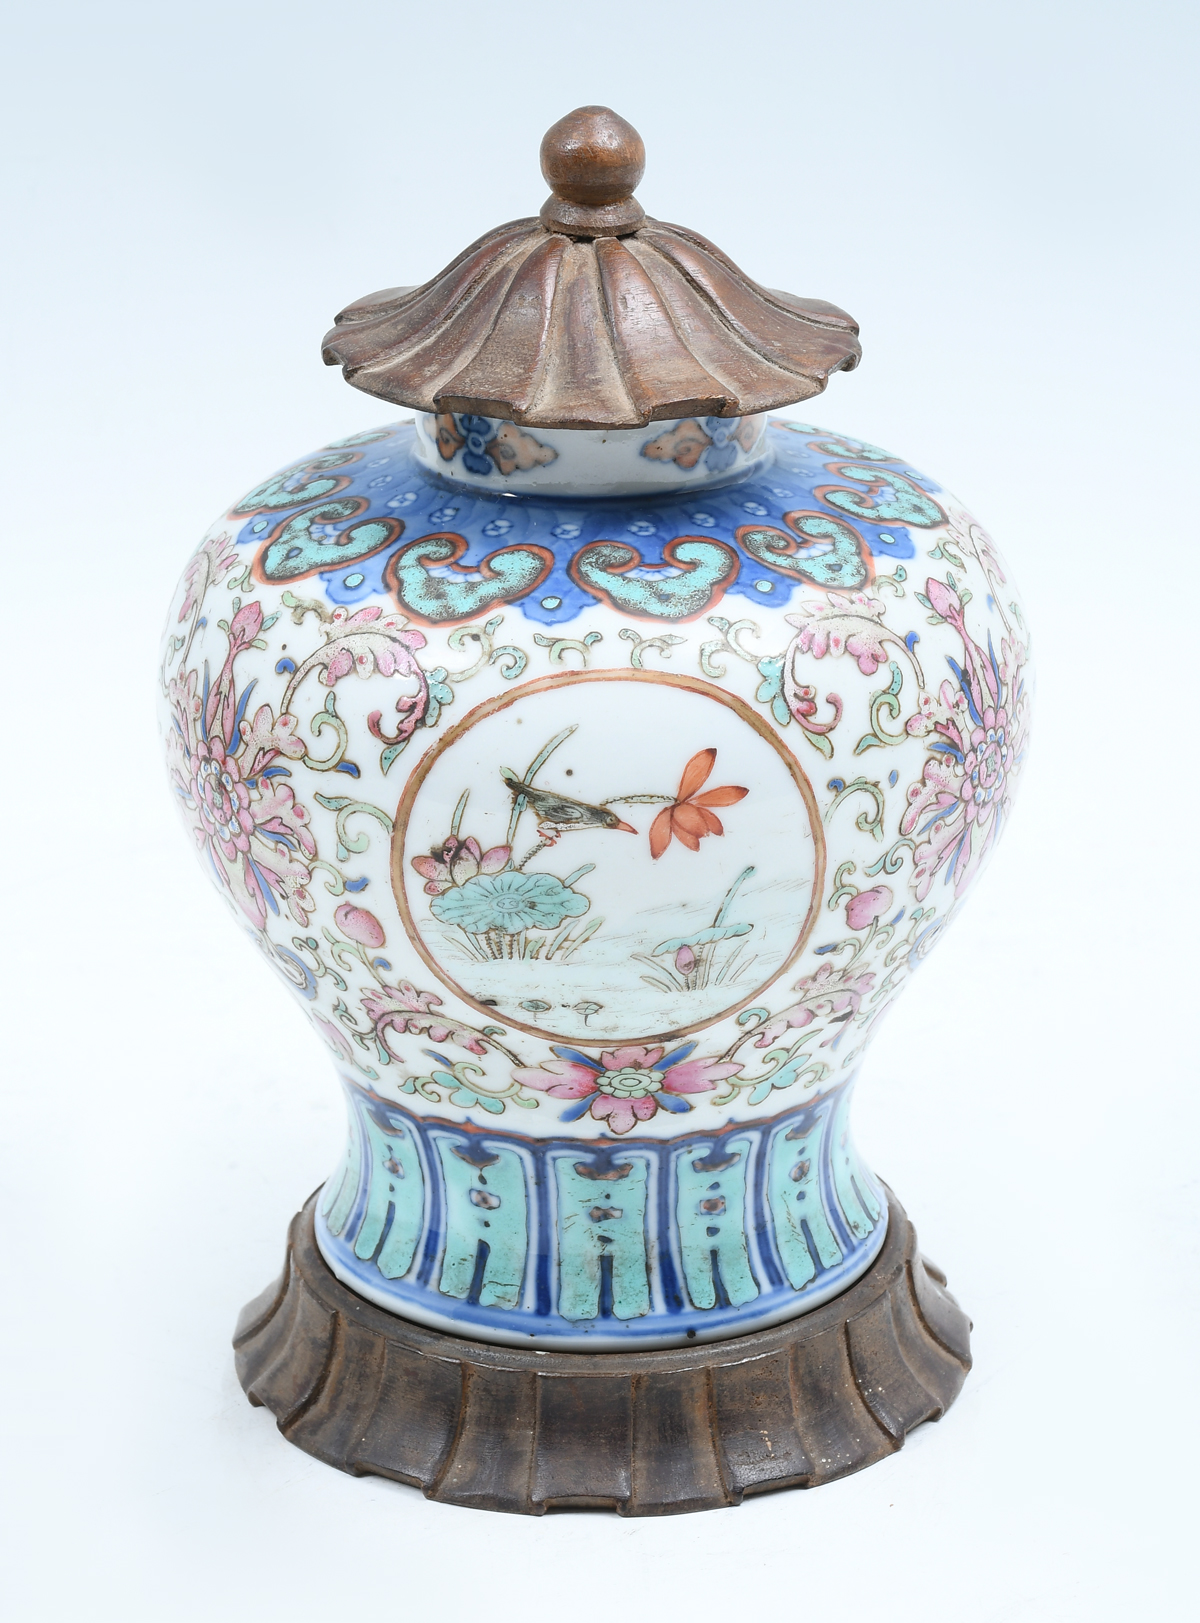 CHINESE FAMILLE ROSE PORCELAIN